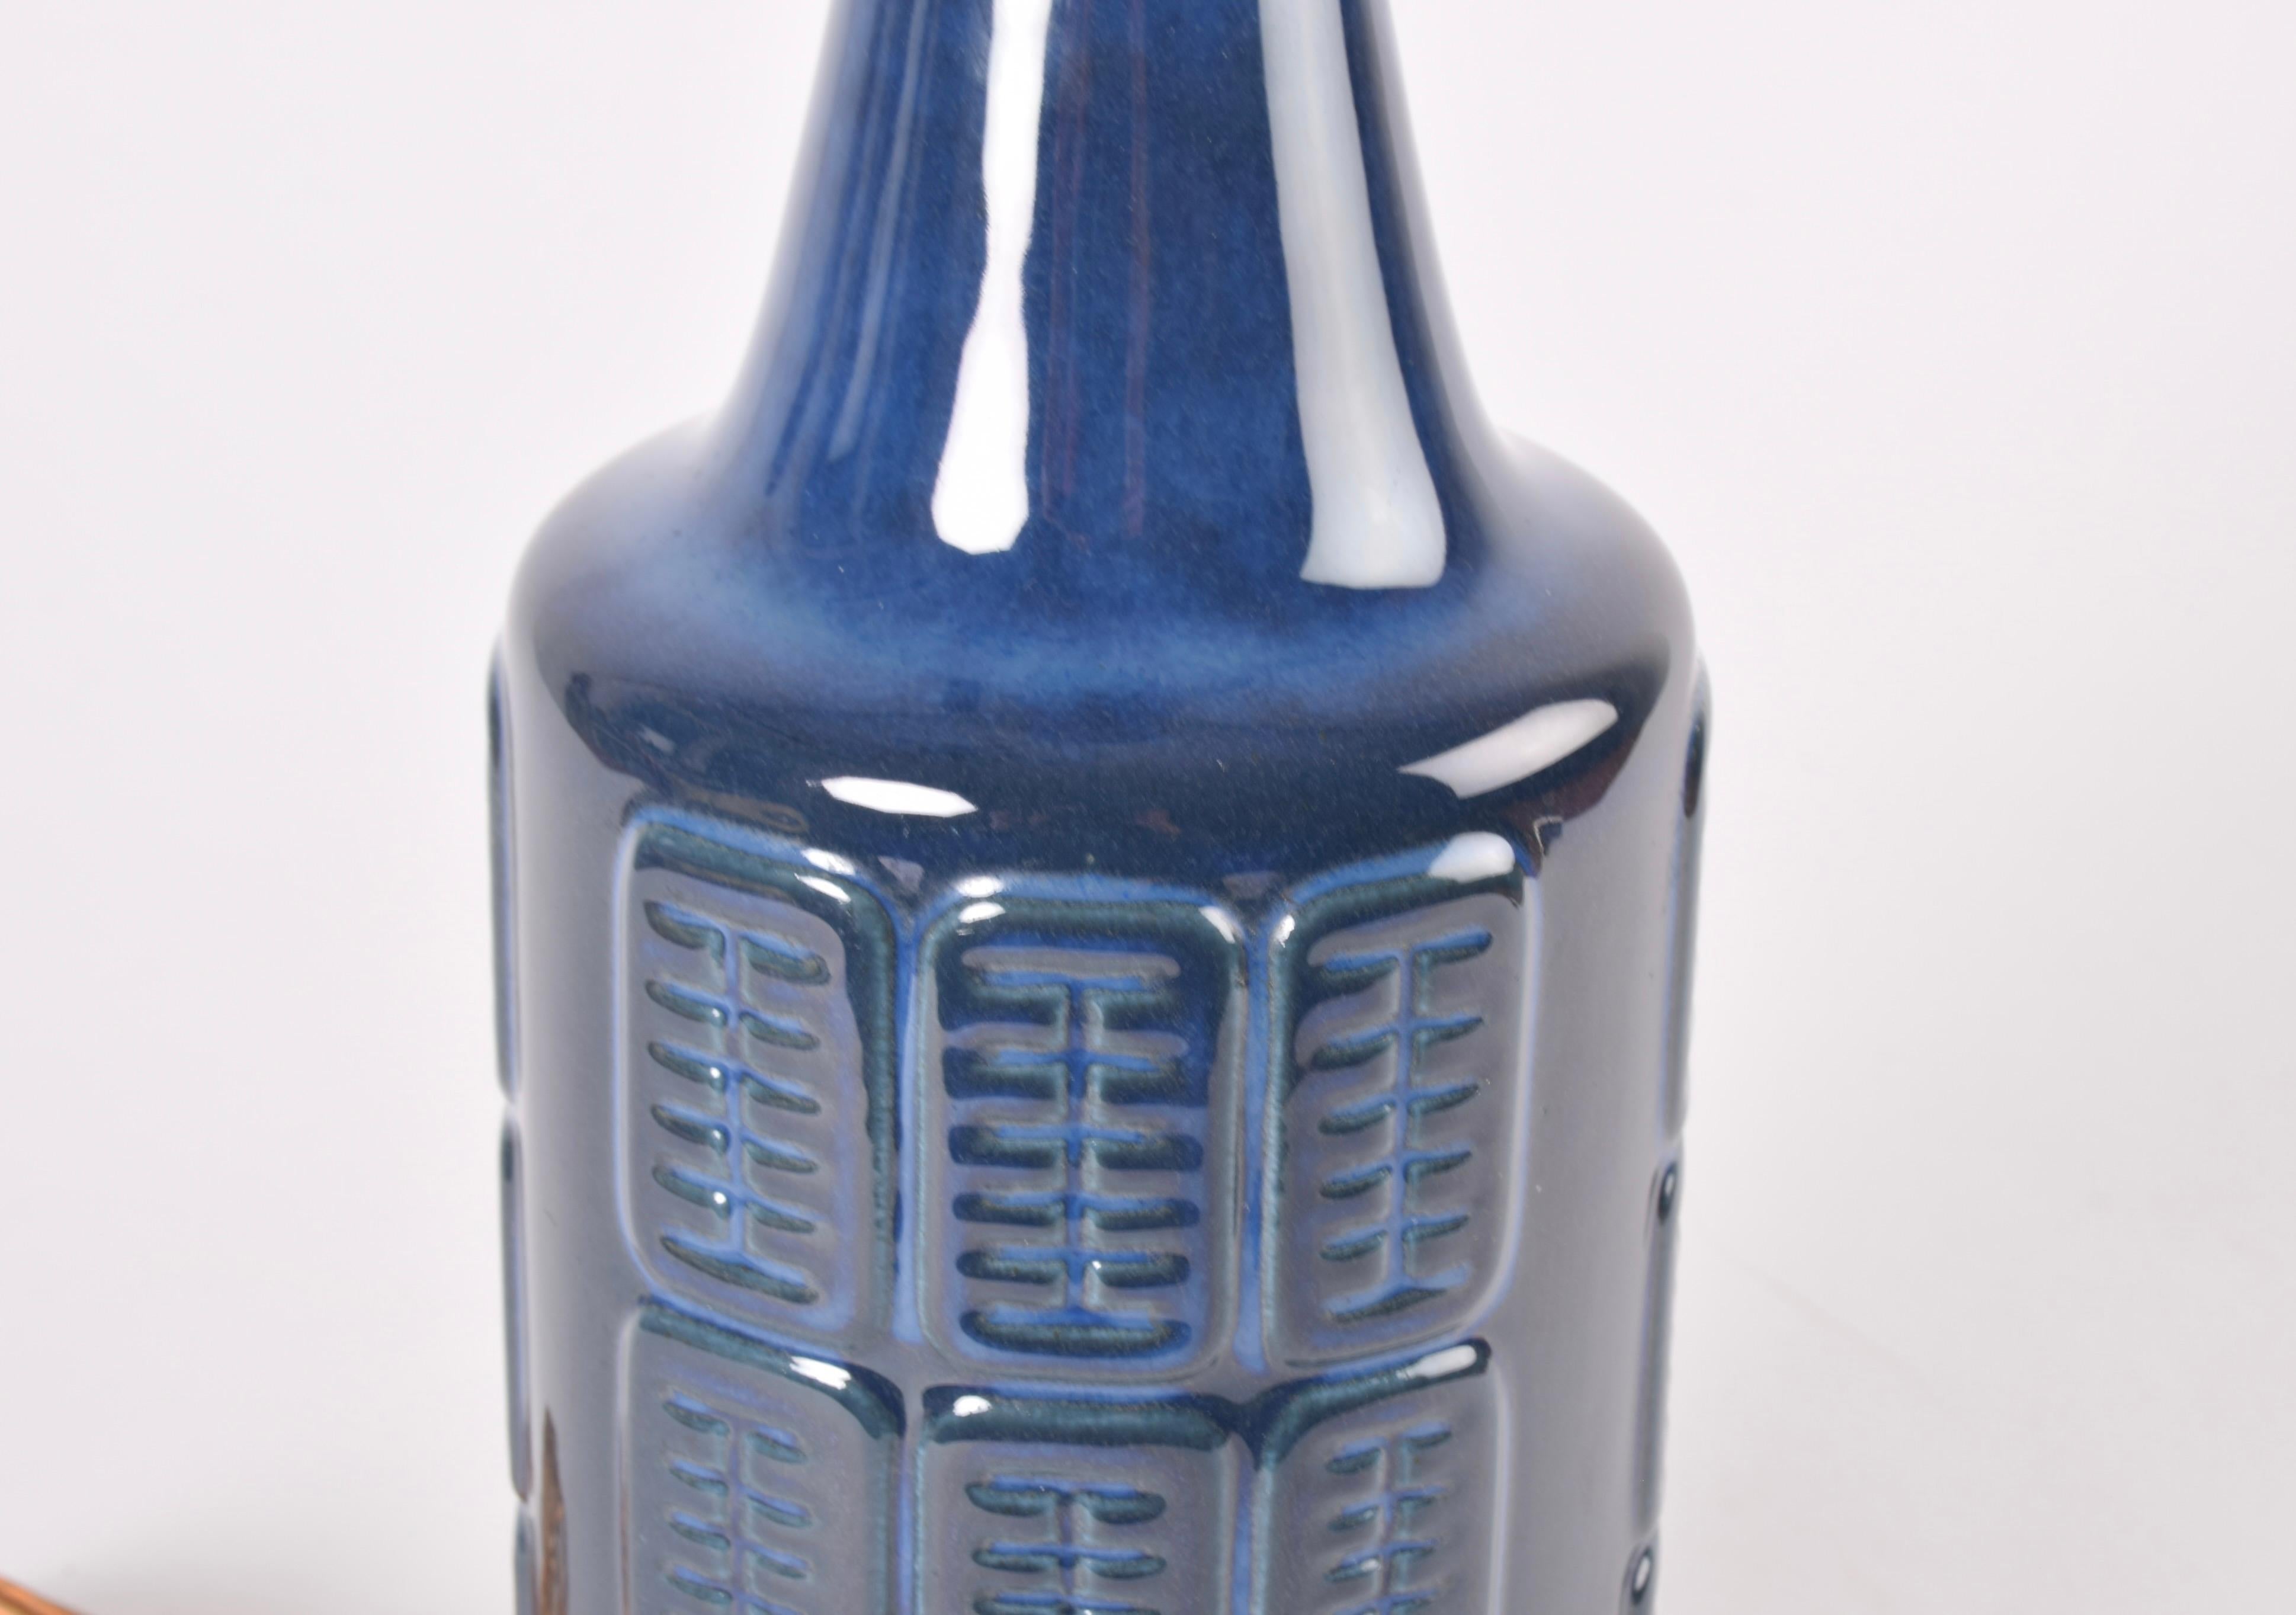 Mid-20th Century Danish Midcentury Blue Ceramic Table Lamp by Einar Johansen for Søholm, 1960s For Sale